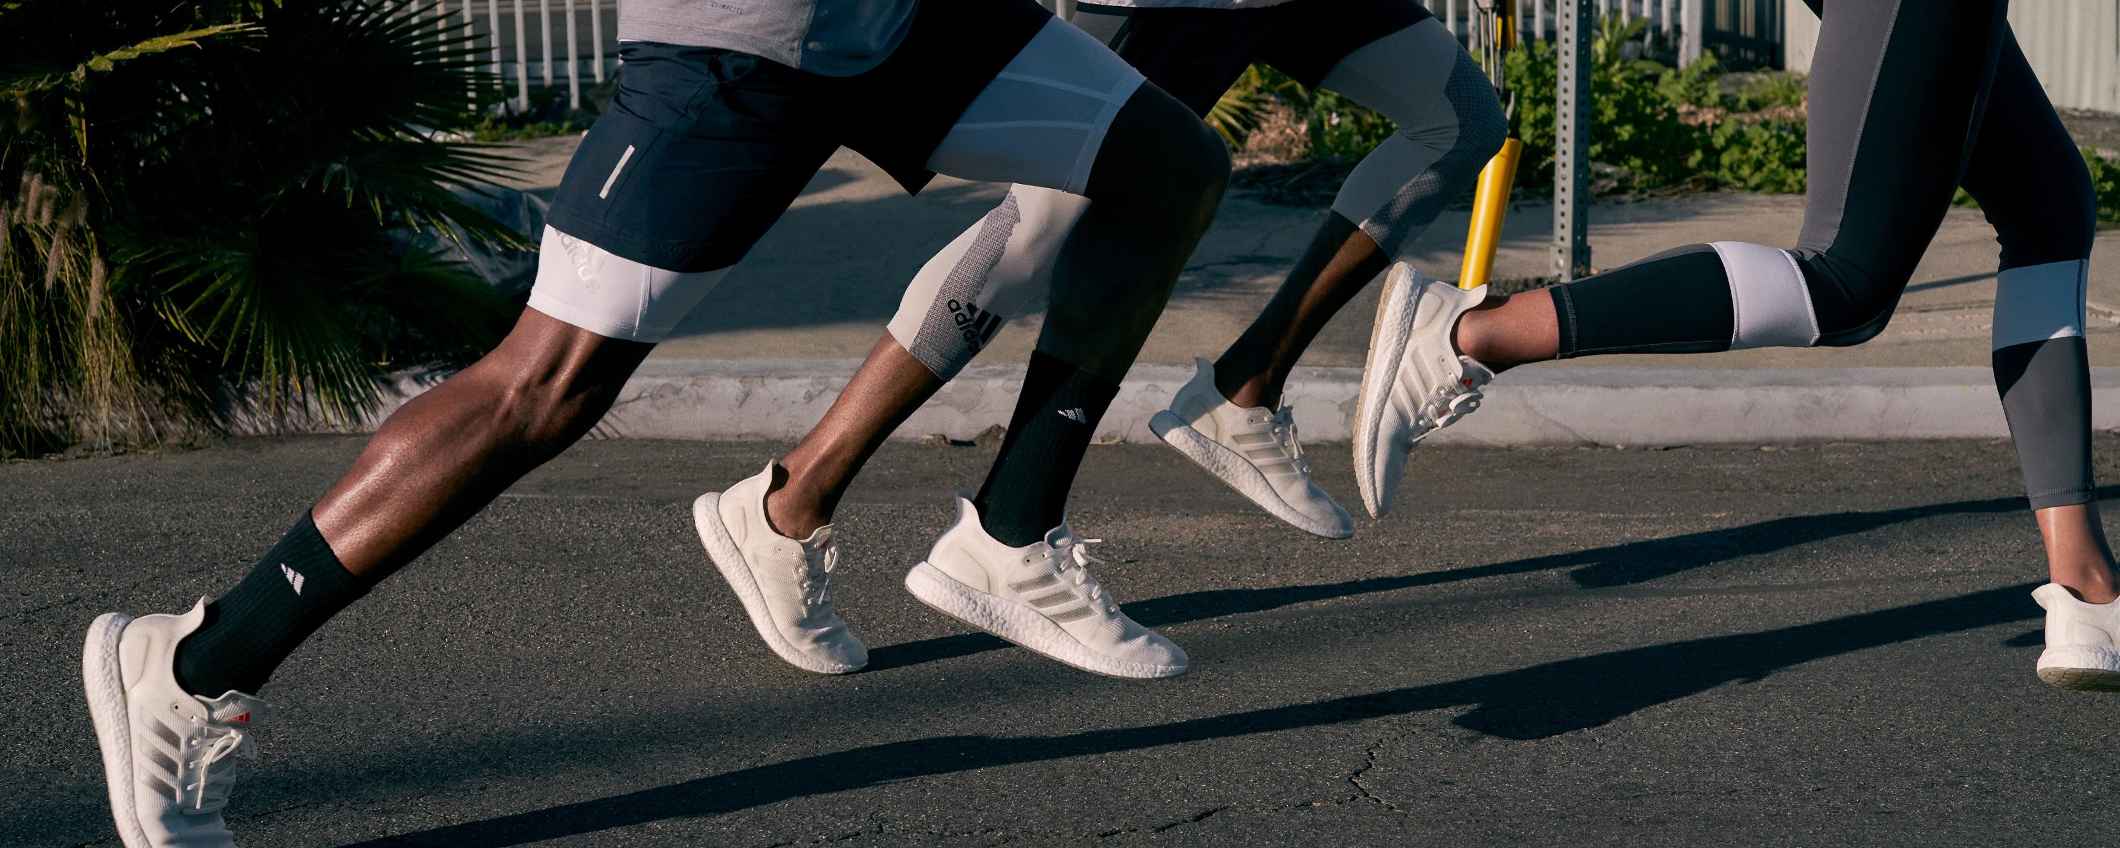 Adidas has a footprint that ethical can be proud of